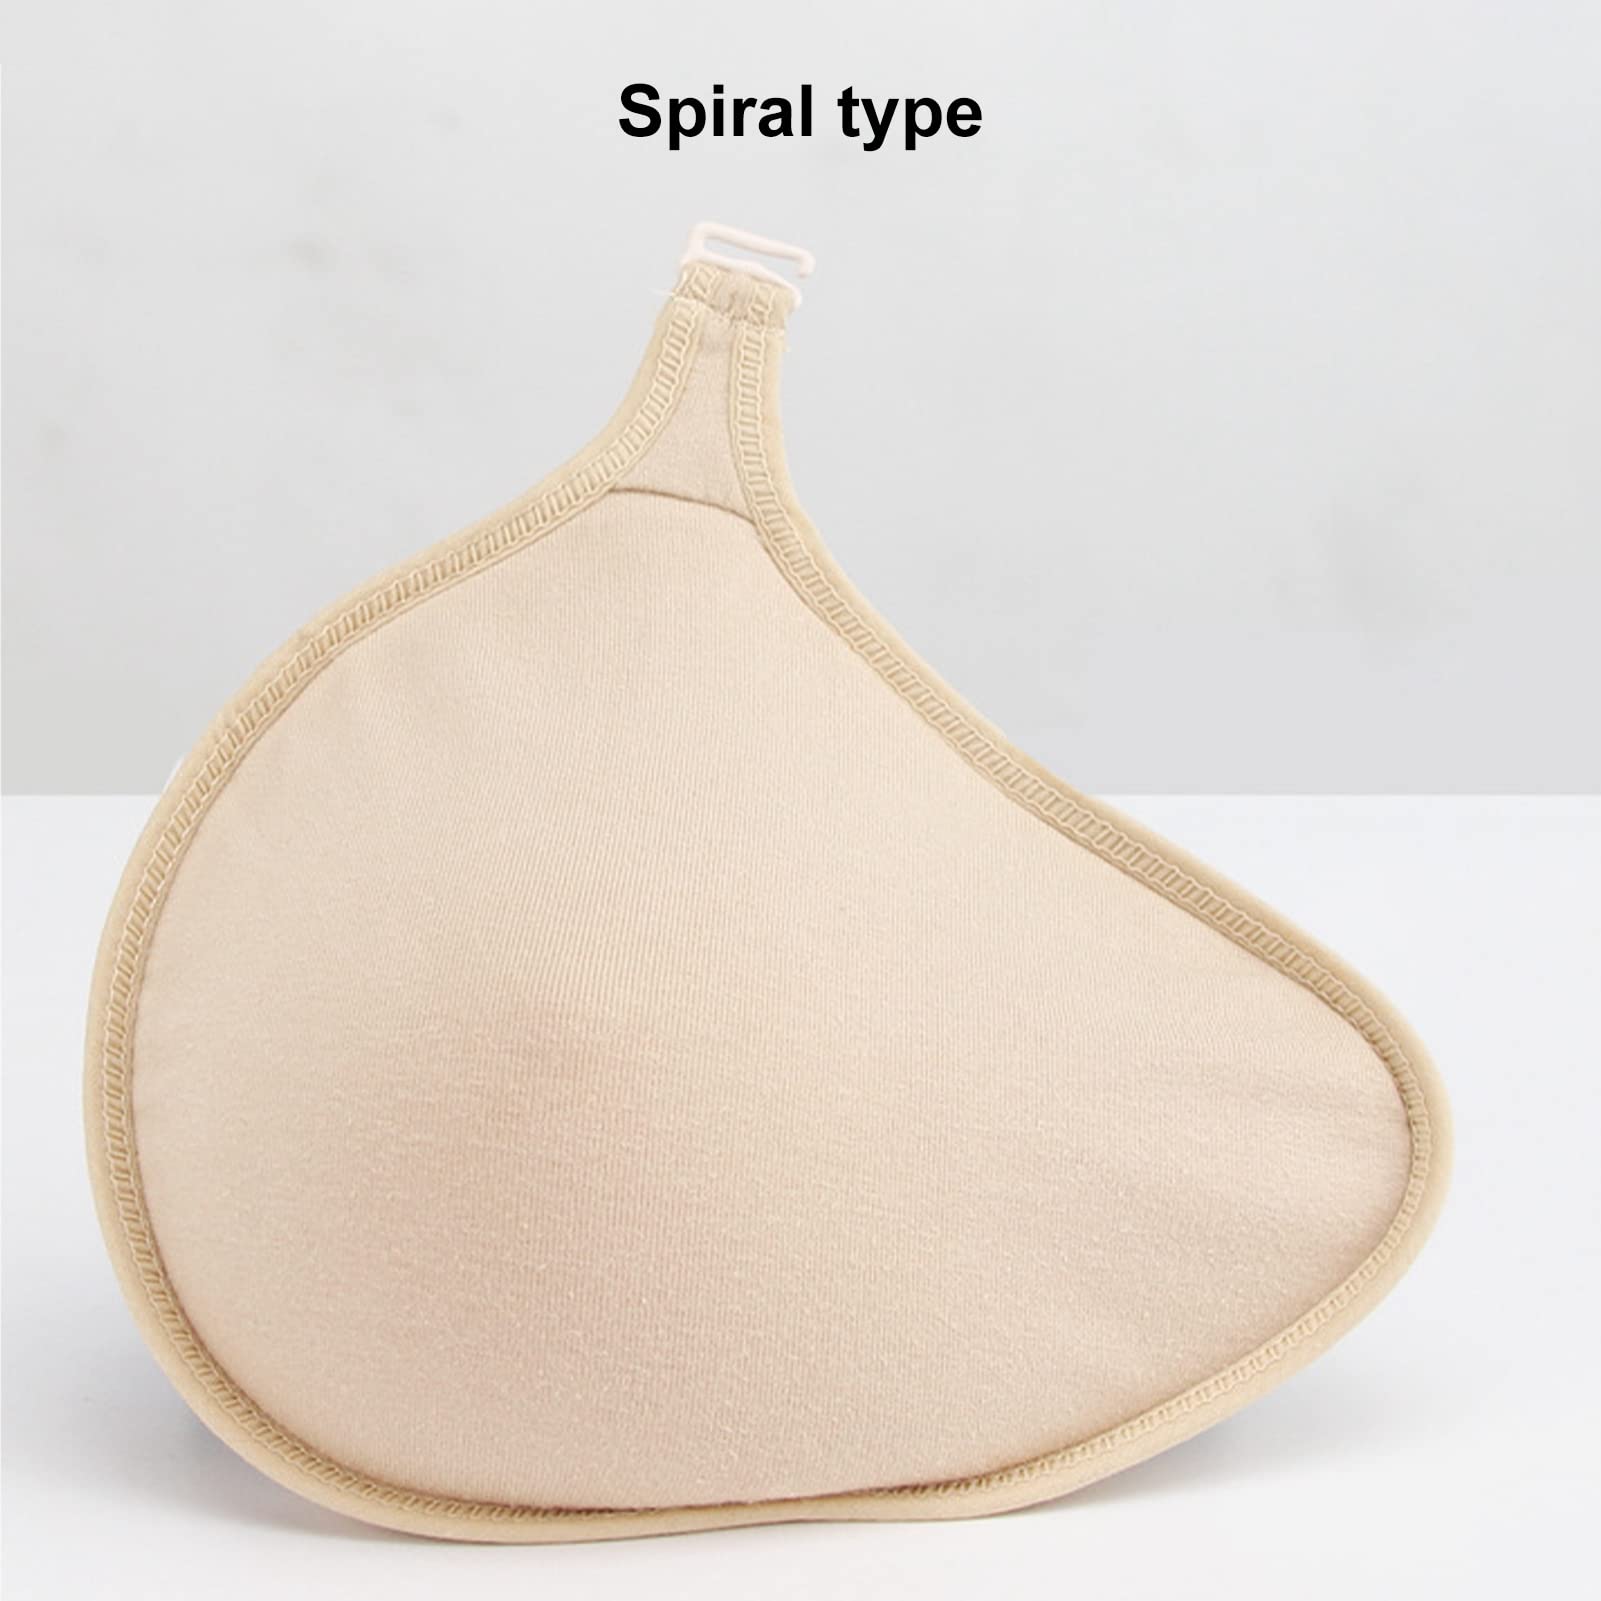 Bra Pads Inserts, Mastectomy Prosthesis Cover Bag Sweatabsorbent Cotton Elastic Silicone Breast Forms Protective Cover Mastectomy Prosthesis Hook Design Bra Inserts Push Up (Left)